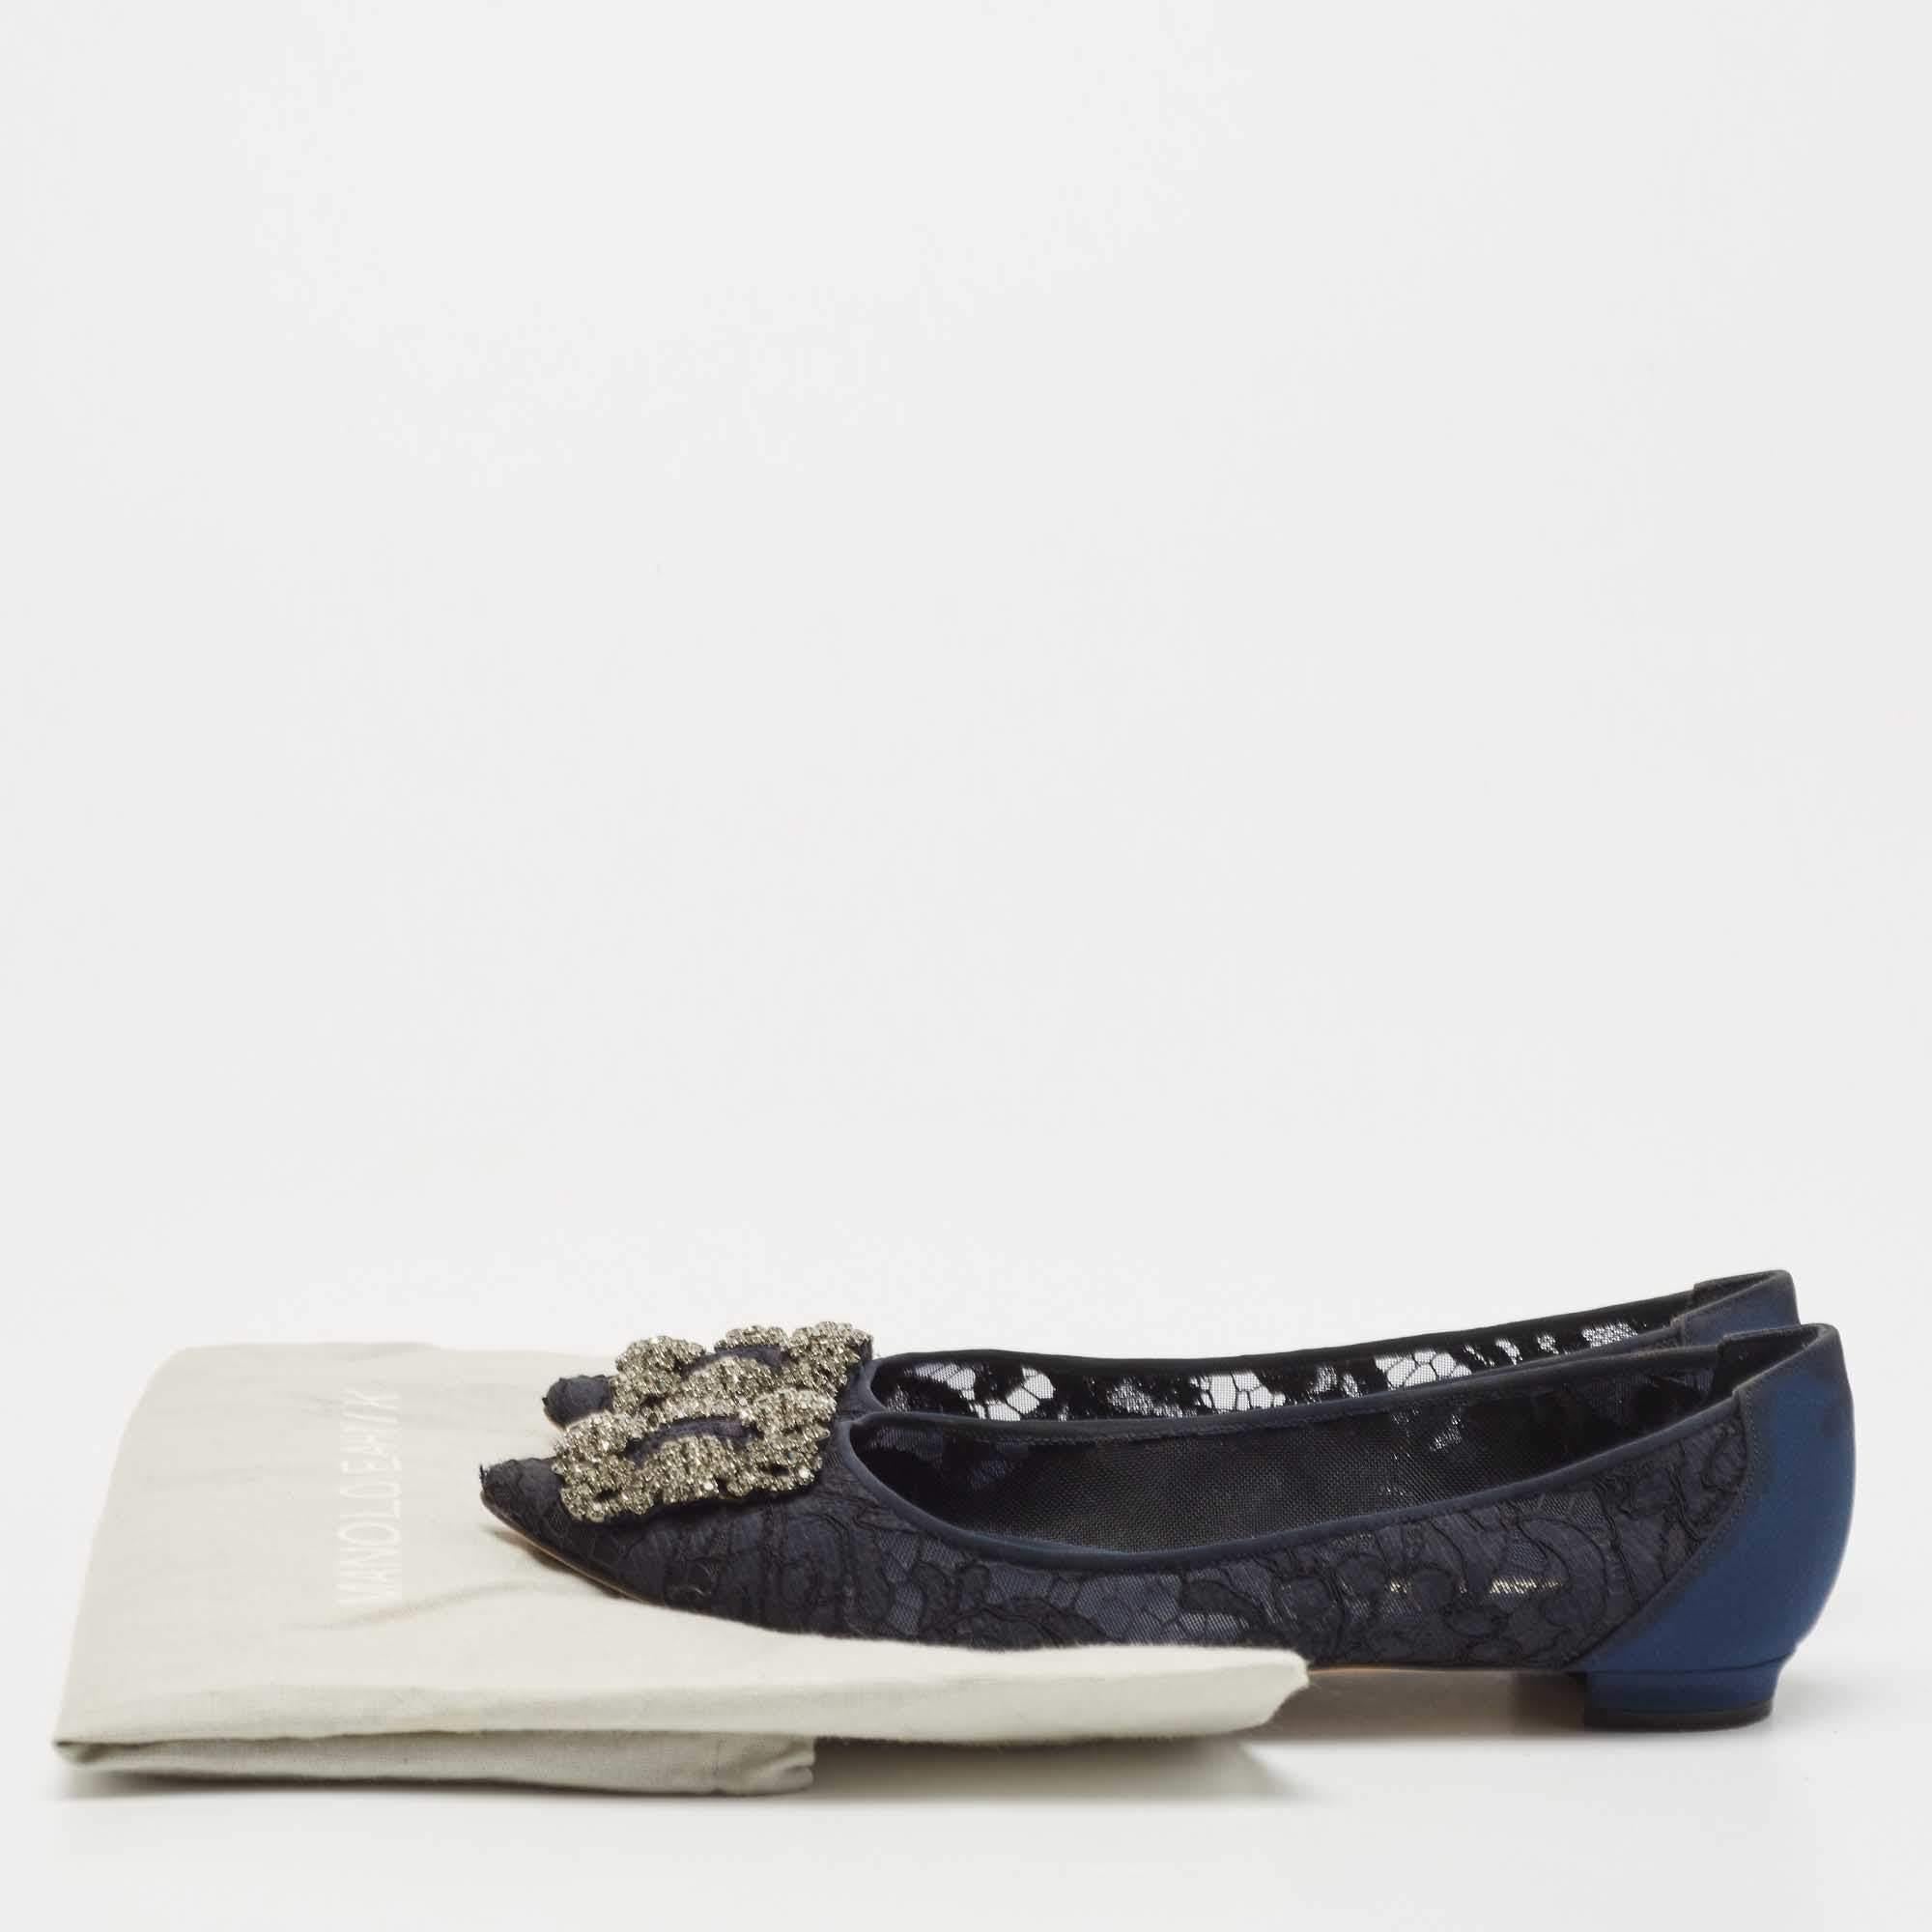 Manolo Blahnik Navy Blue Lace and Satin Hangisi Ballet Flats Size 37.5 2